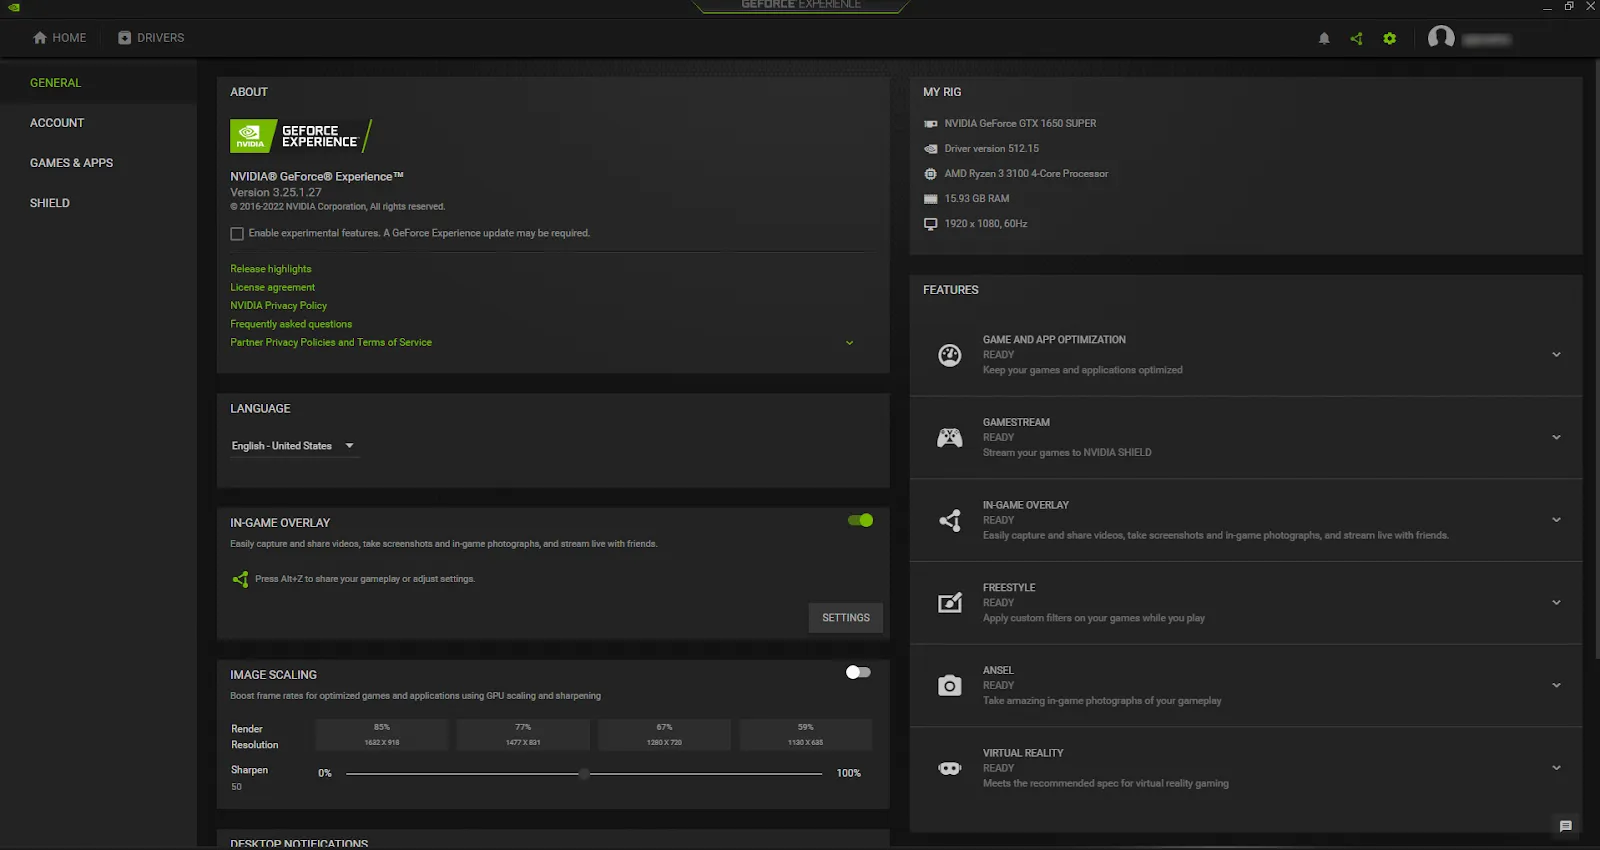 The first step is actually registering an Nvidia account, which is mandatory for using this program.